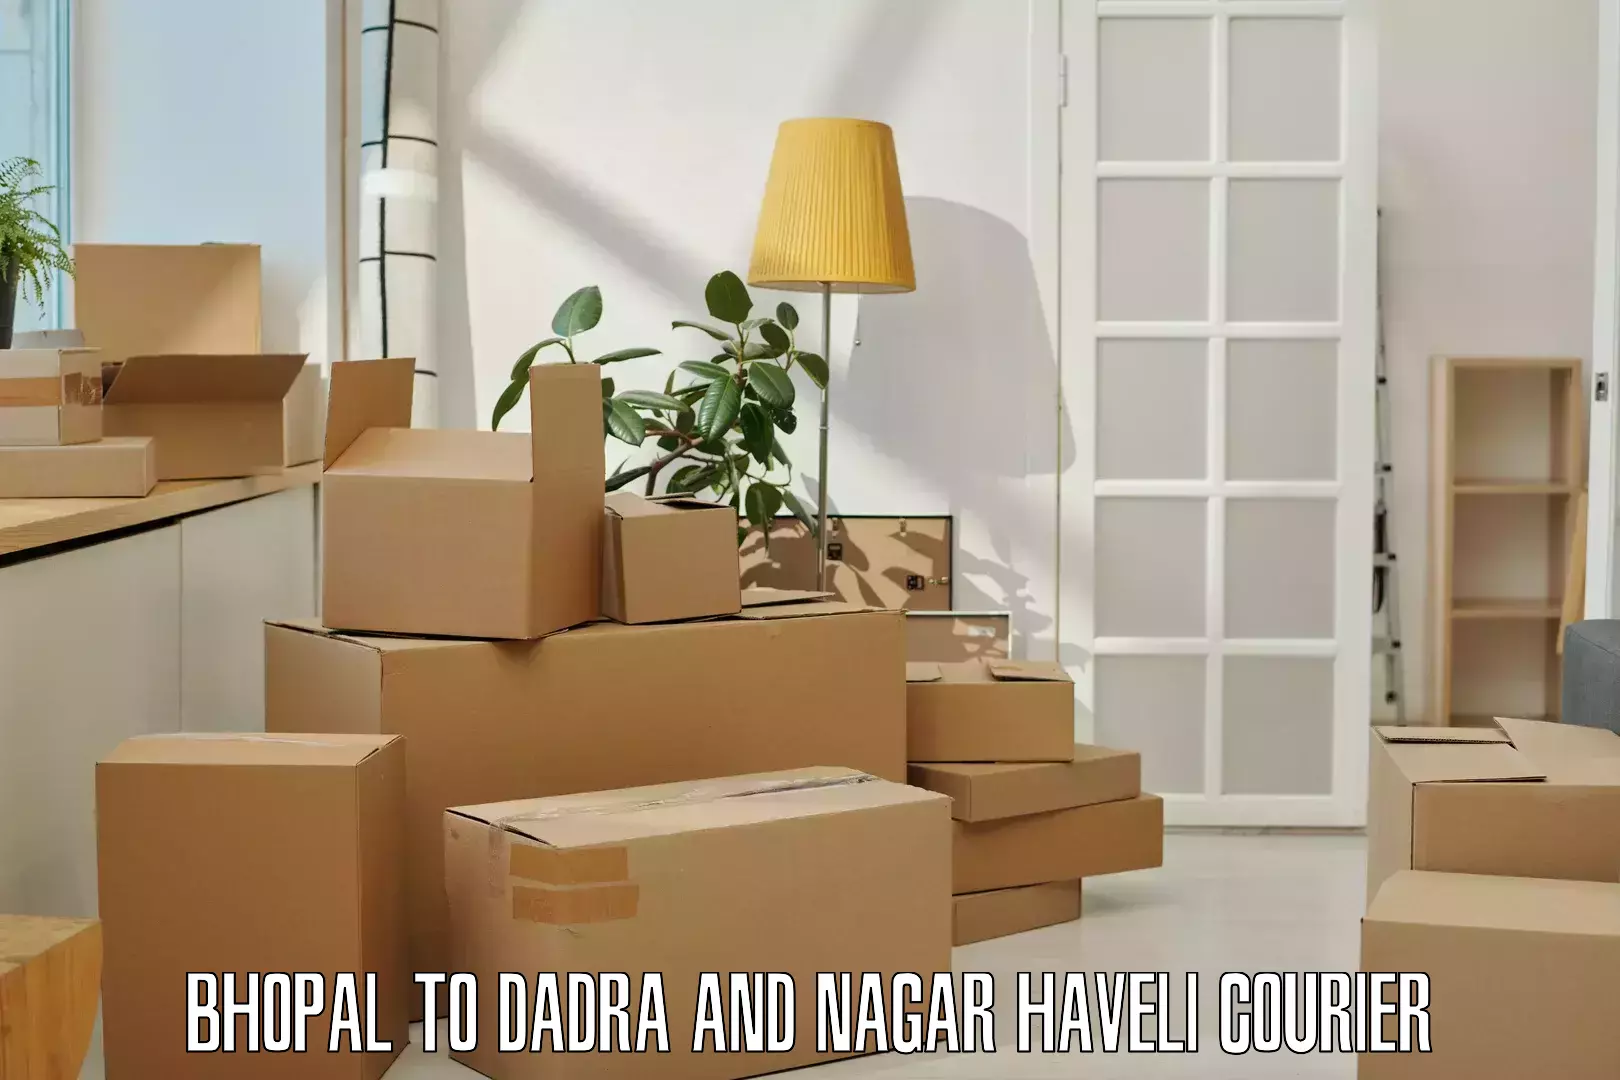 High-speed parcel service Bhopal to Dadra and Nagar Haveli